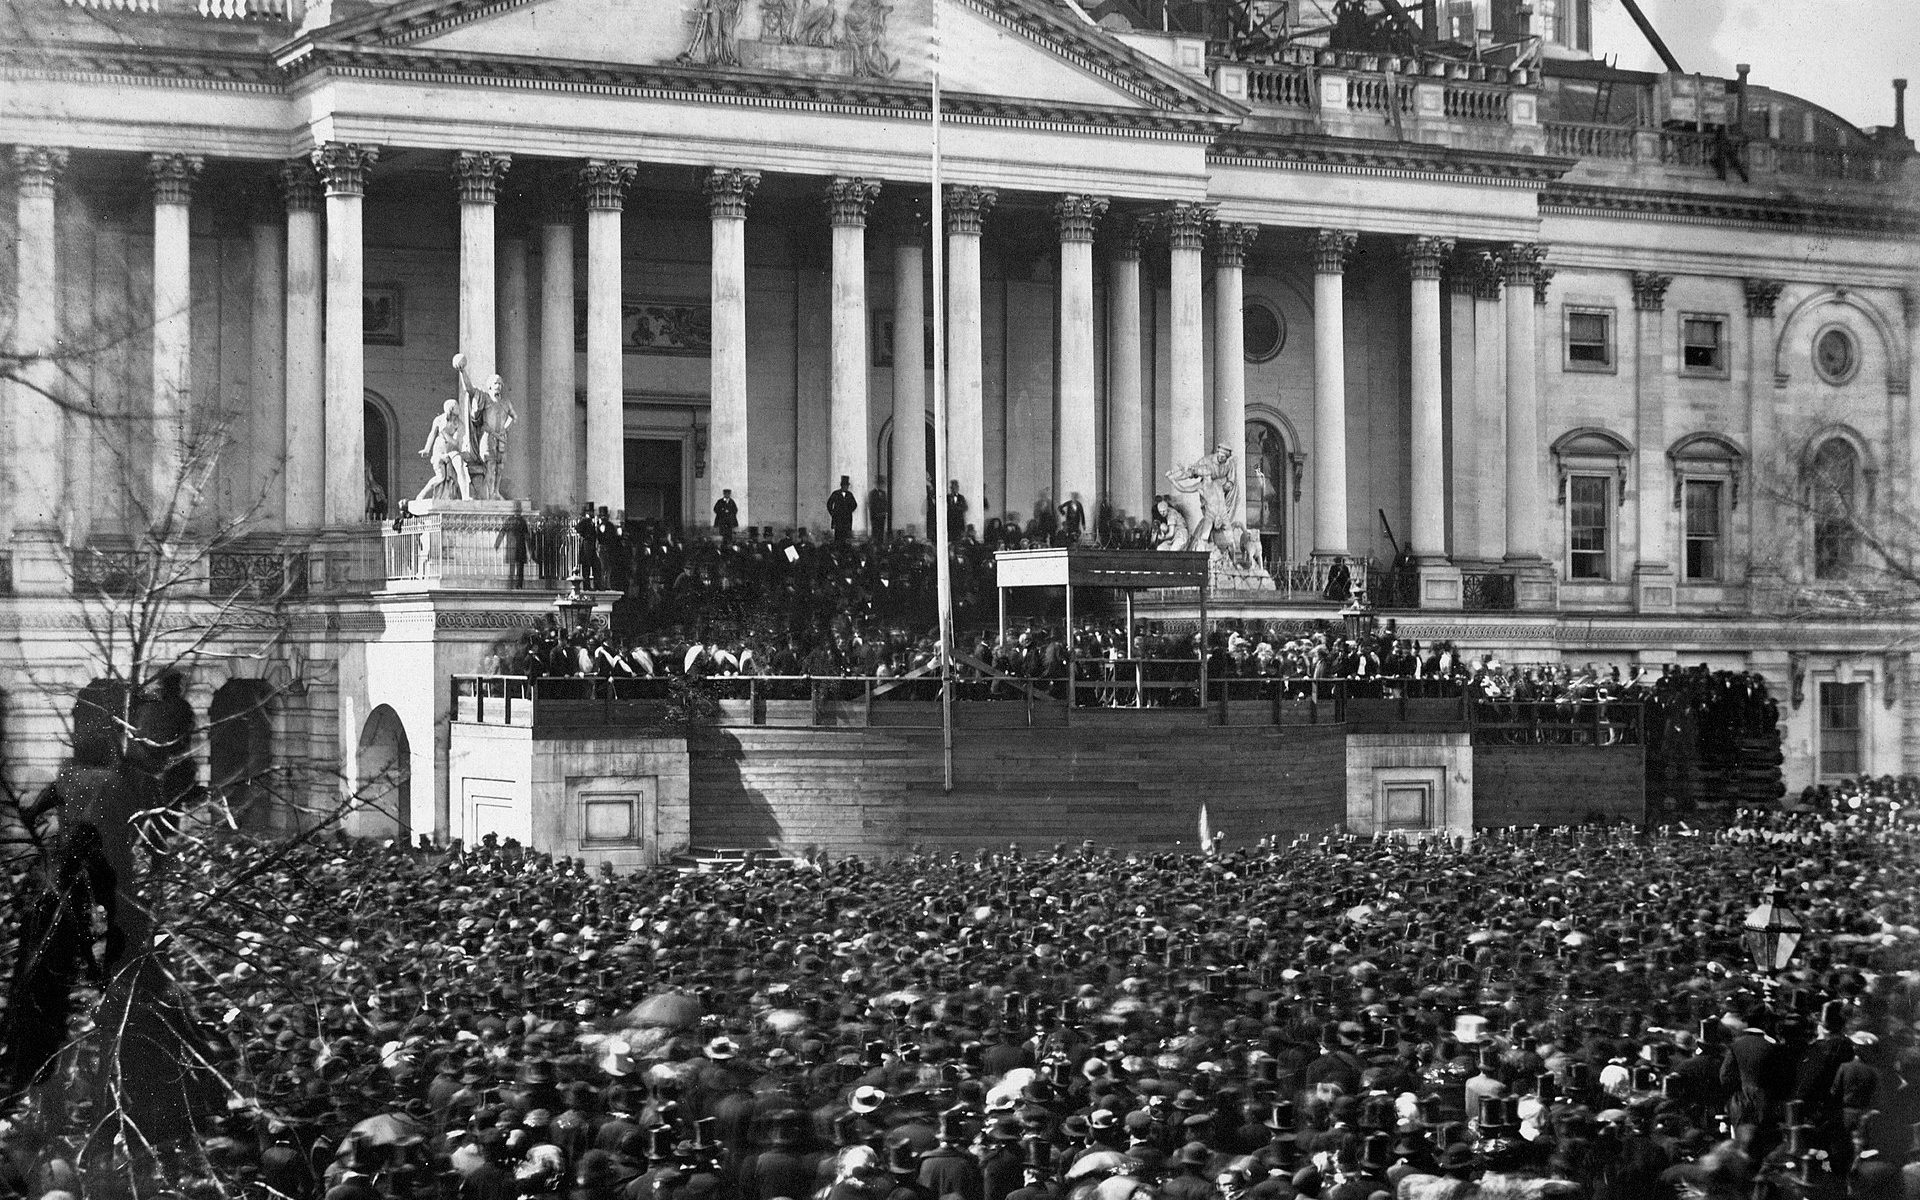 Abraham Lincoln gives his first inaugural address on the steps of the Capitol